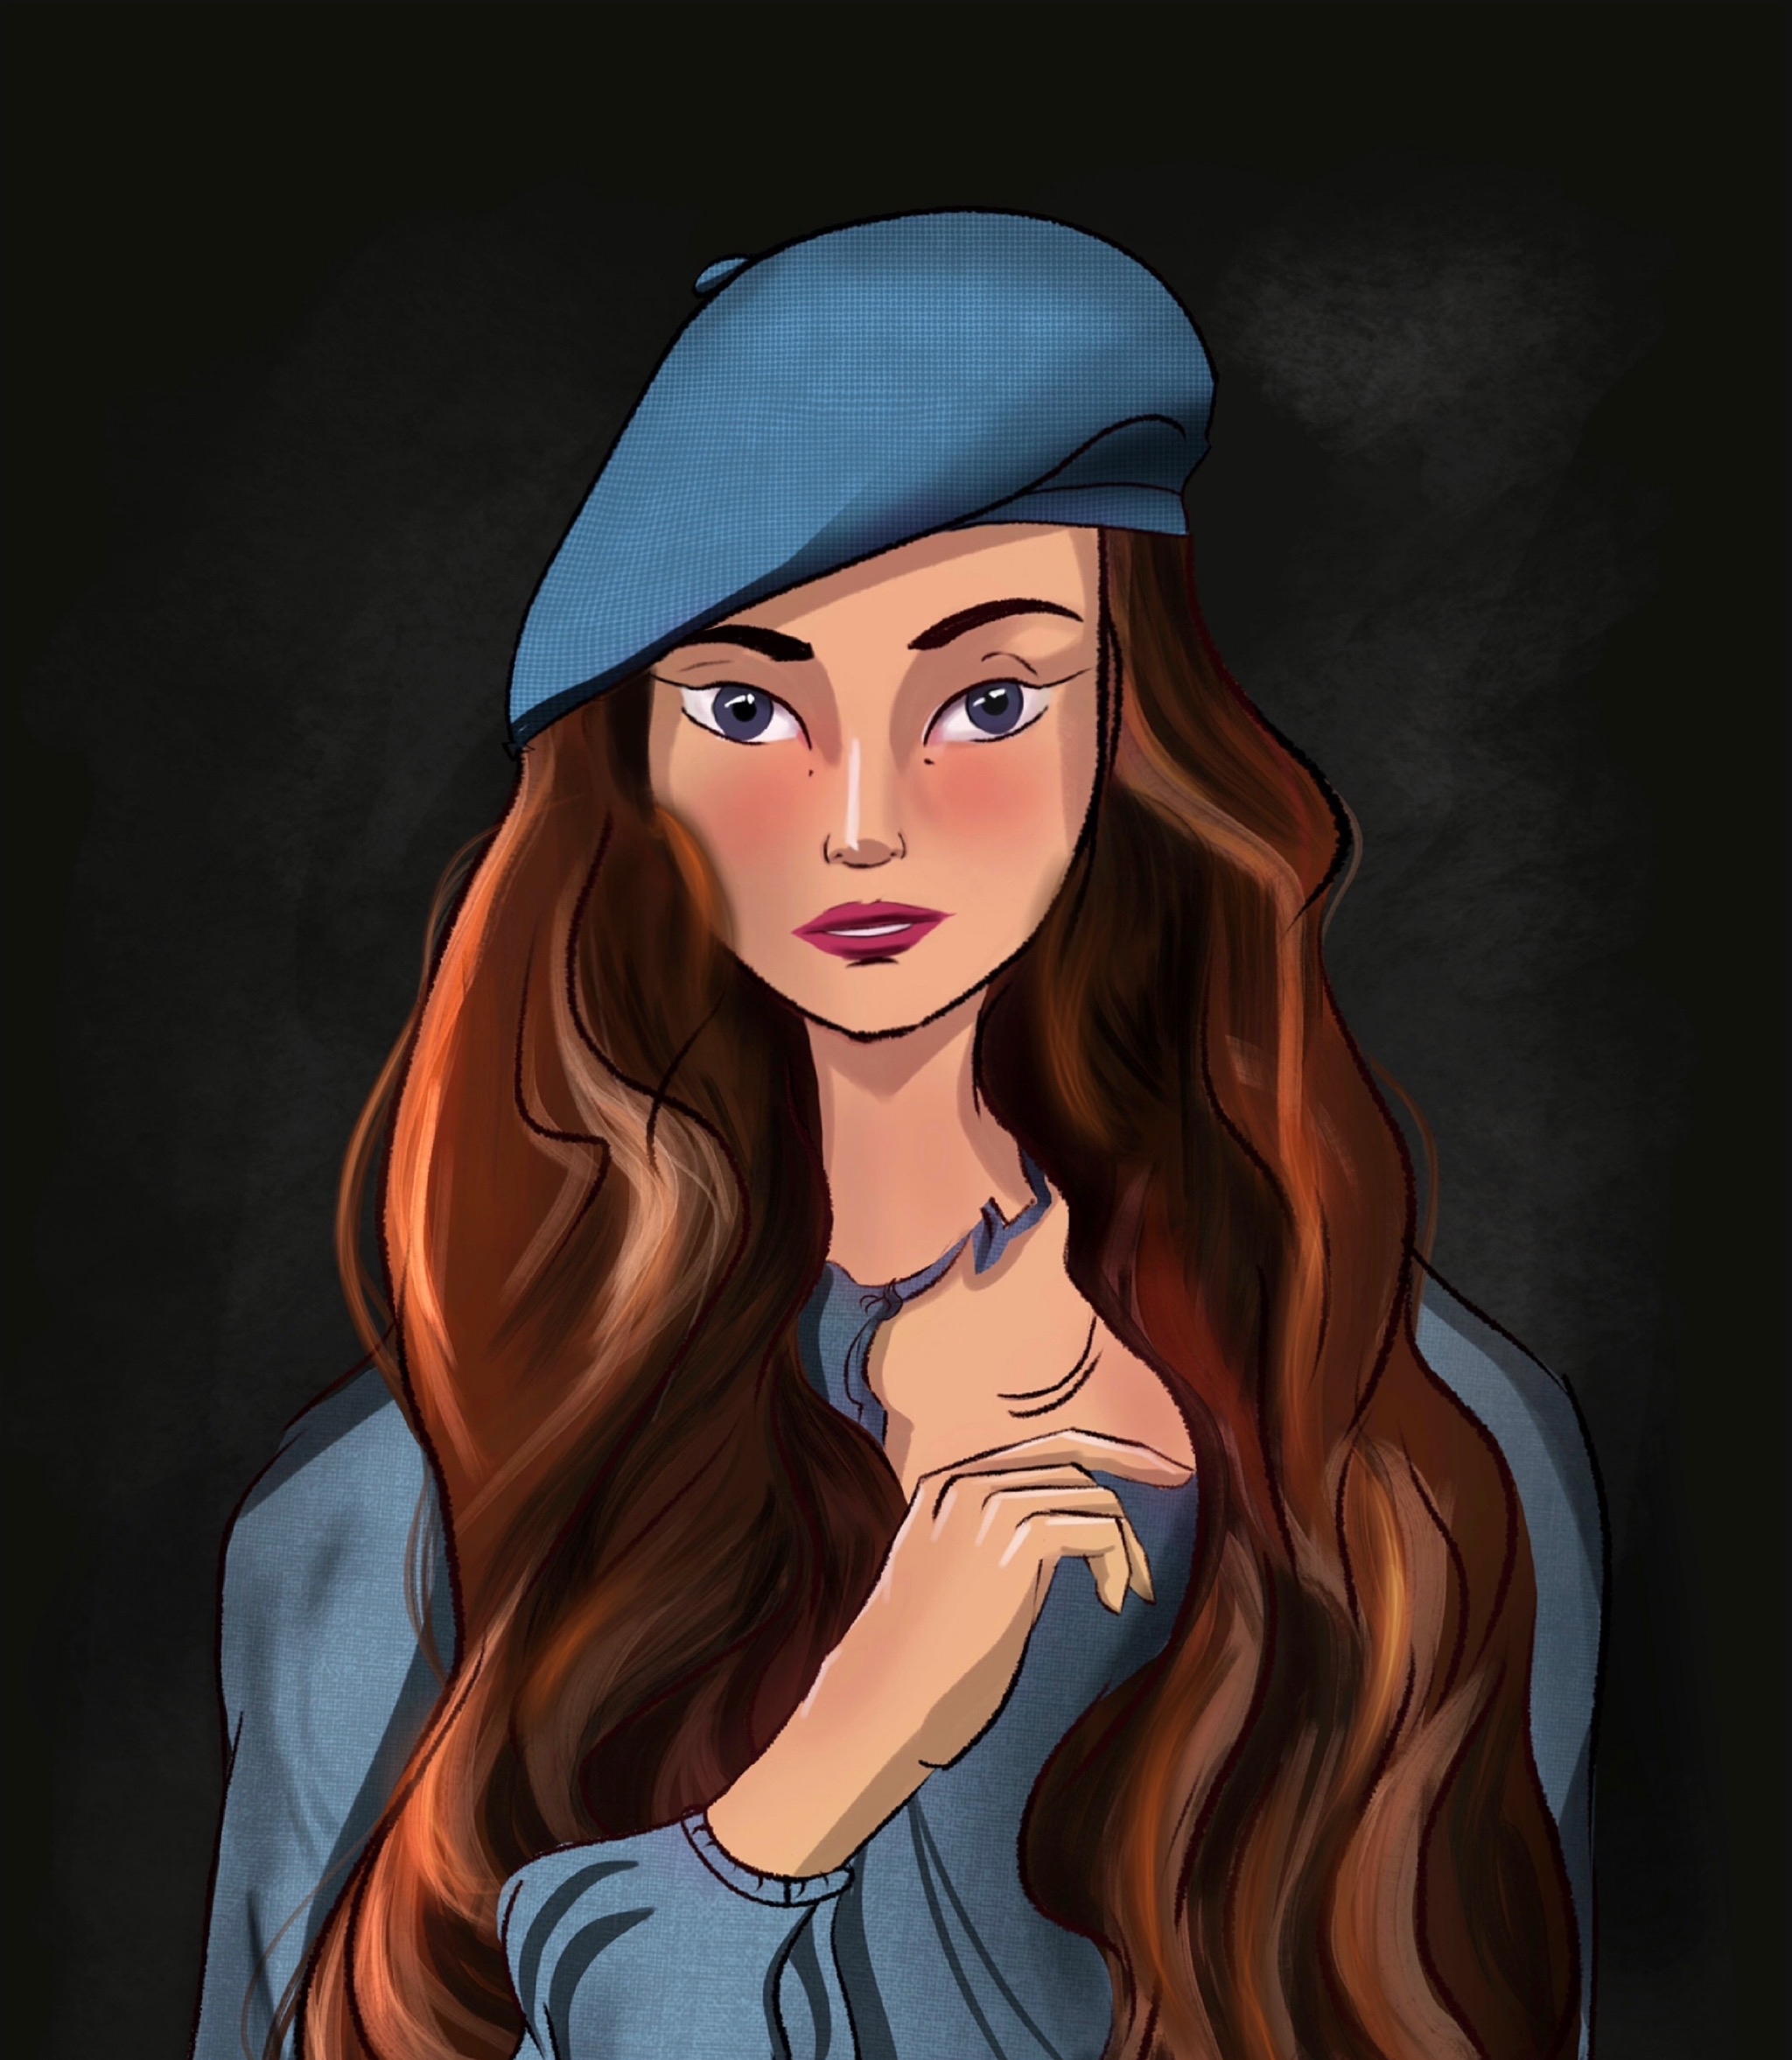 Stylized drawing of a girl - Procreate, Vladimir Suteev, Illustrations, Portrait, Stylization, Drawing on a tablet, Drawing, My